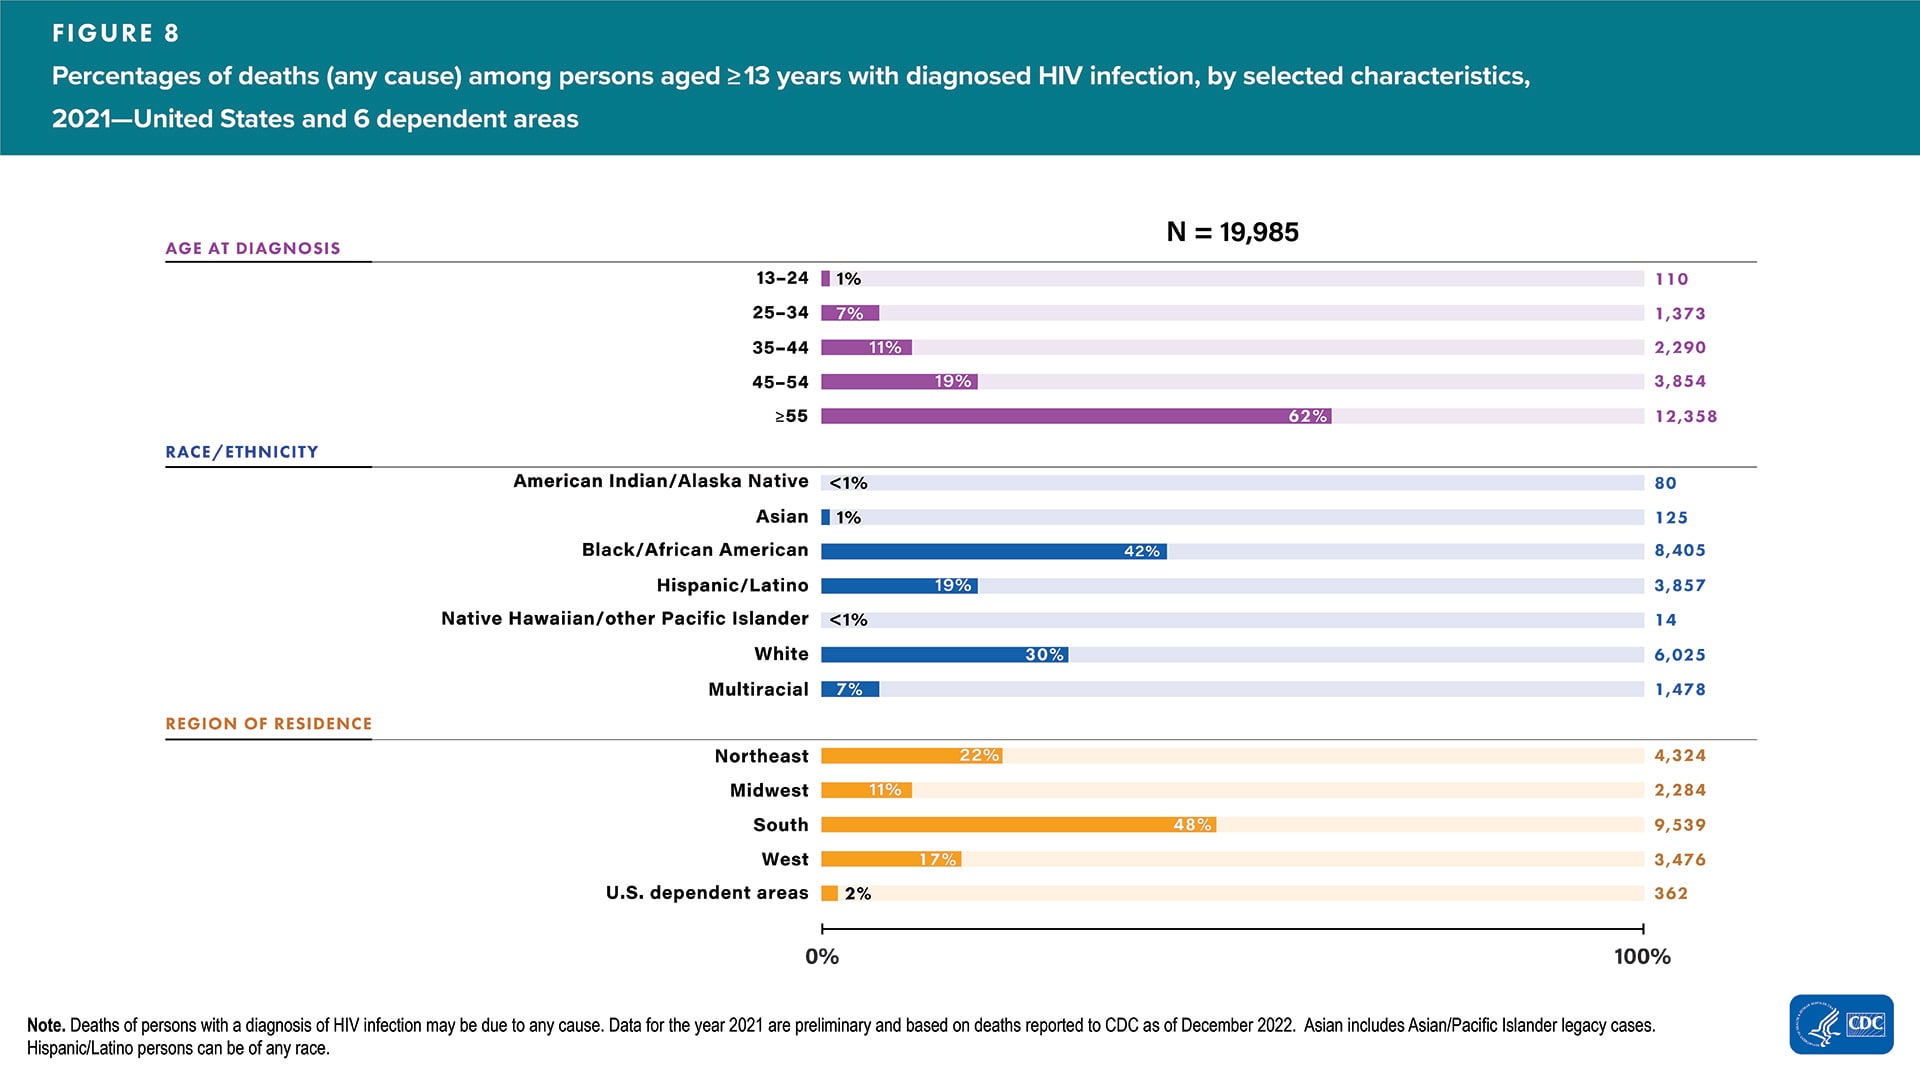 In 2021, in the United States and 6 dependent areas, 62% of the deaths of persons aged ≥13 years with a diagnosis of HIV infection were among persons aged ≥ 55 years, 42% were among Black/African American persons, and 48% were among persons residing in the South.